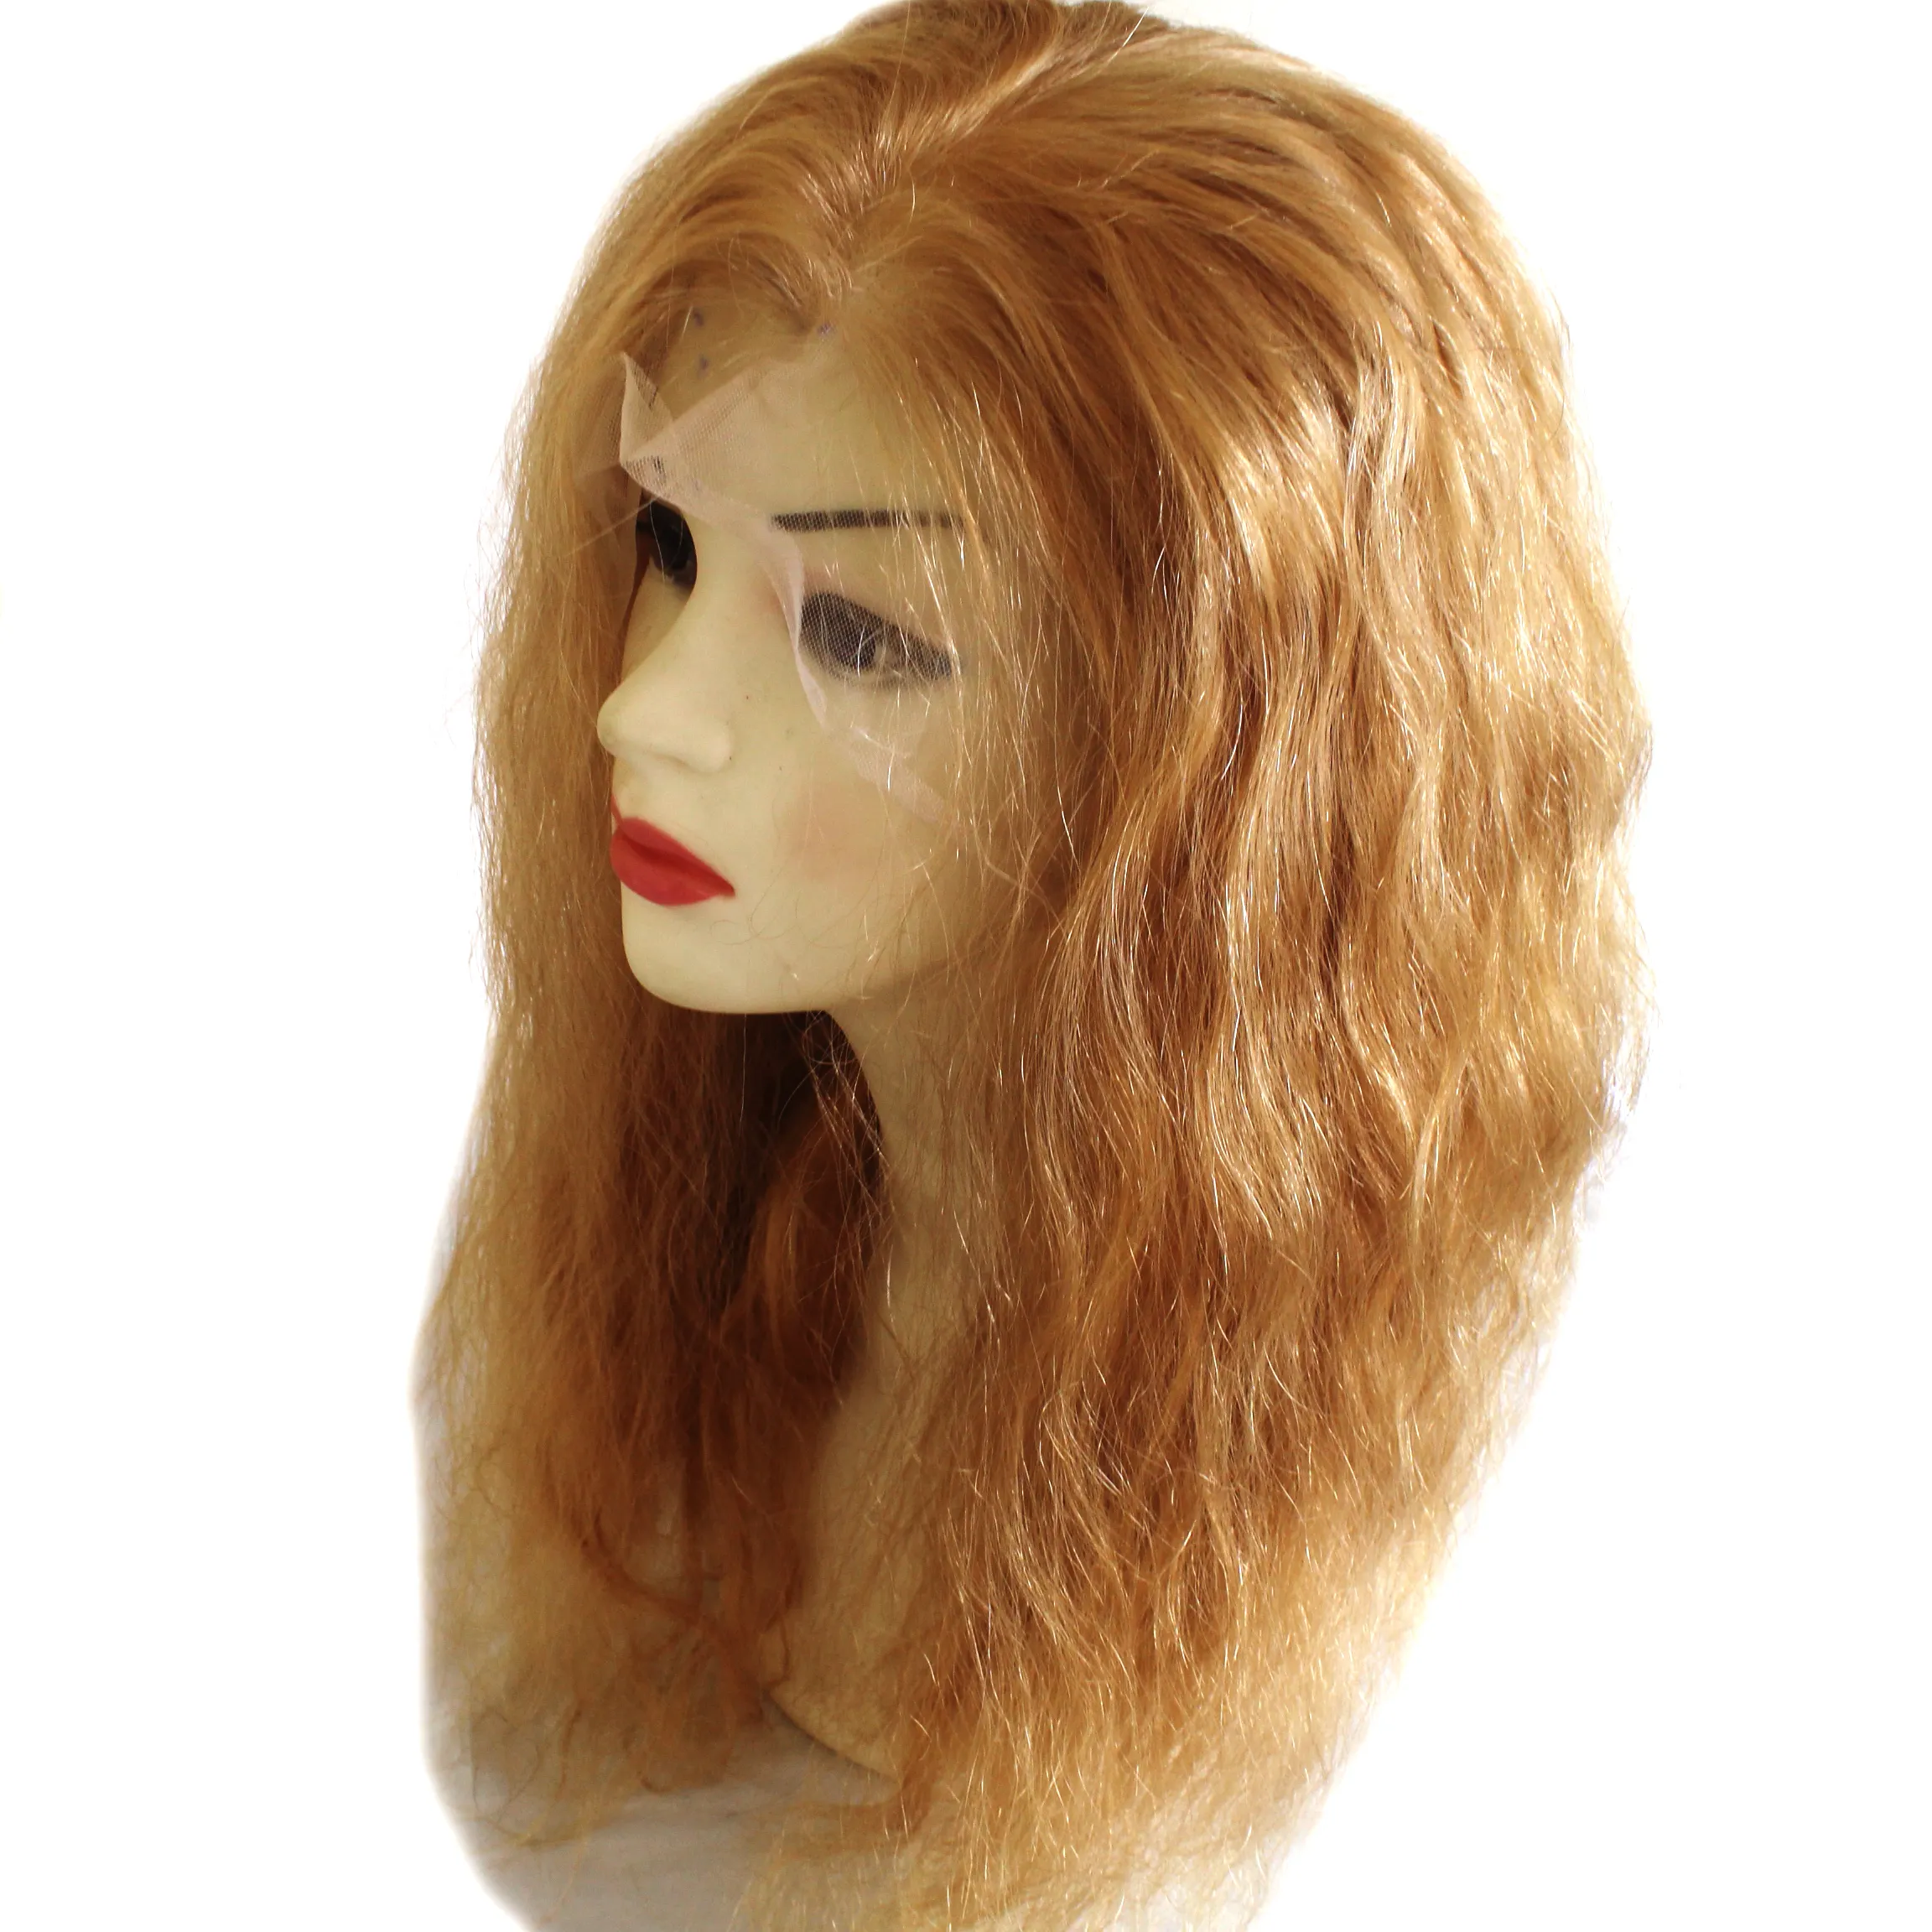 Fashion blonde ombre wig 100% human hair, Honey Blonde Ombre Highlights Color 13x4 13x6 natural Lace Front Human Hair Wigs